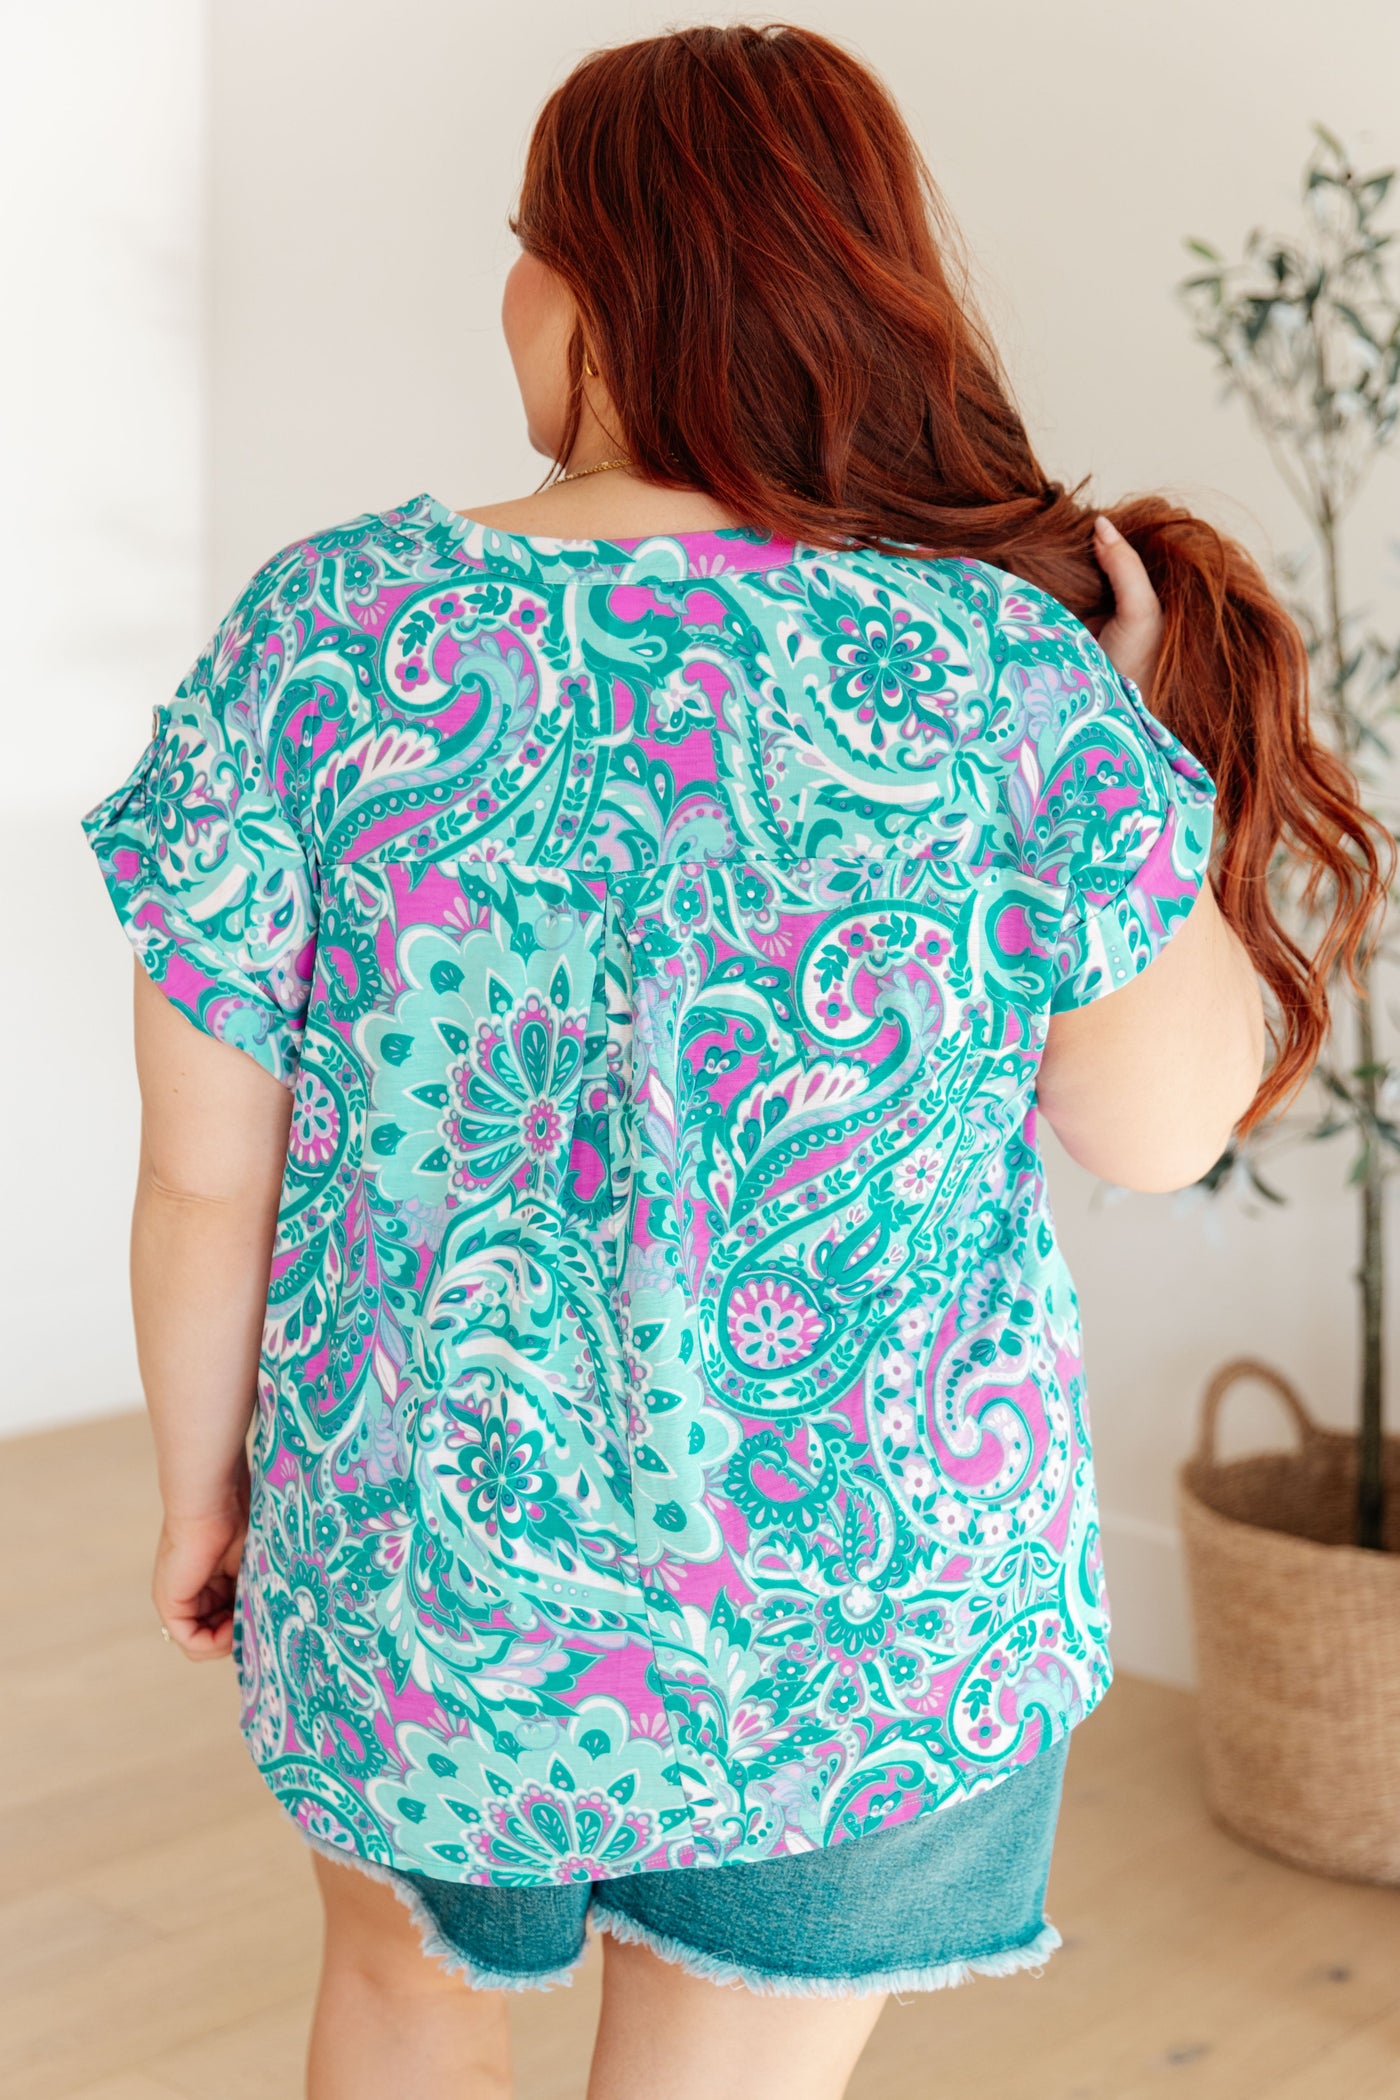 Lizzy Cap Sleeve Top in Magenta and Teal Paisley-Womens-Ave Shops-Market Street Nest, Fashionable Clothing, Shoes and Home Décor Located in Mabank, TX